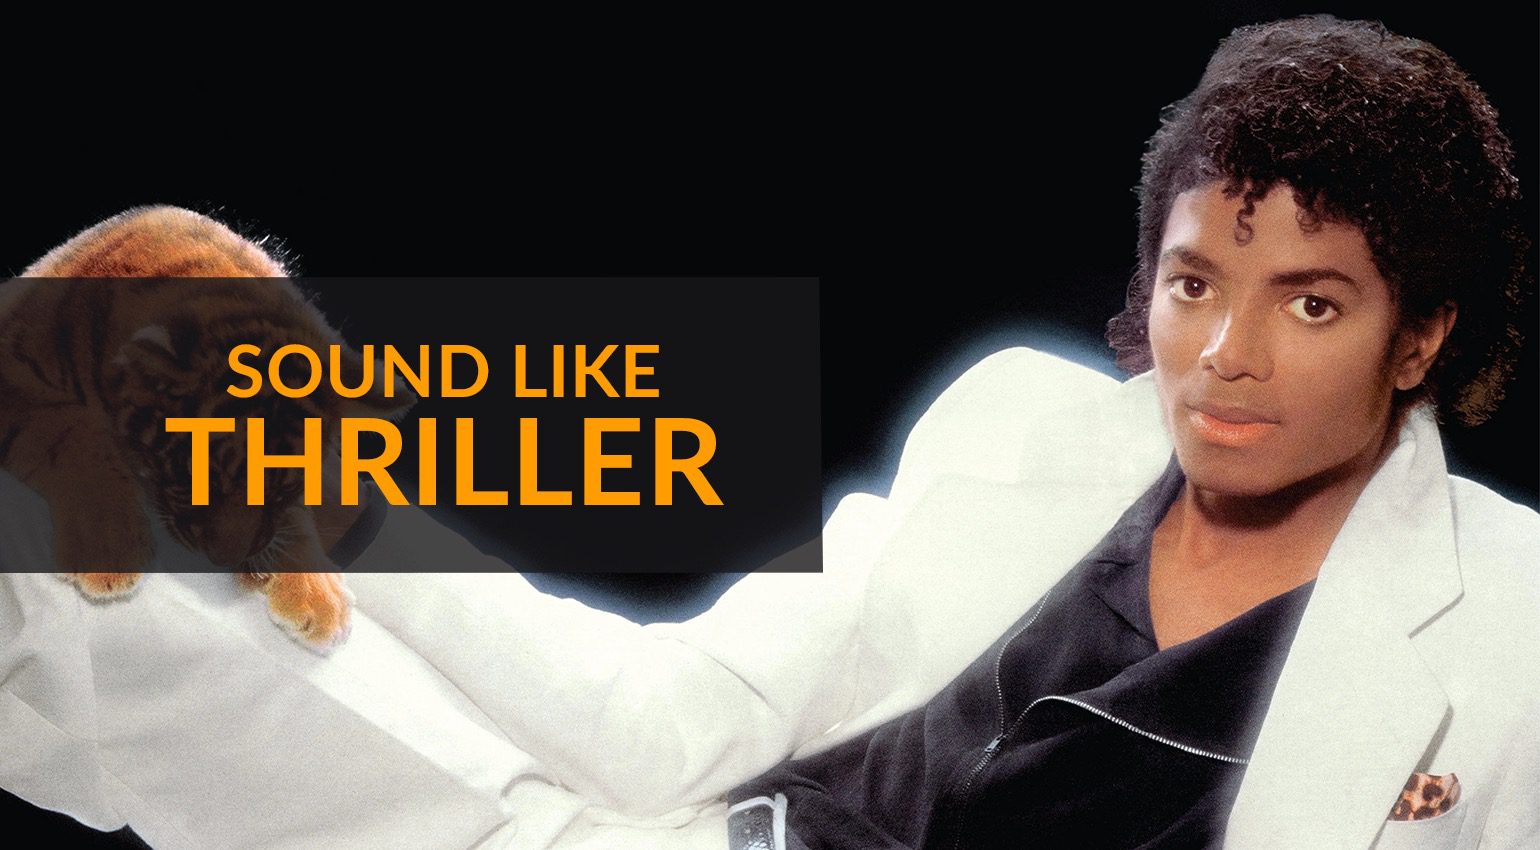 Get Michael Jackson's 'Thriller' For Free This Week! - Bloody